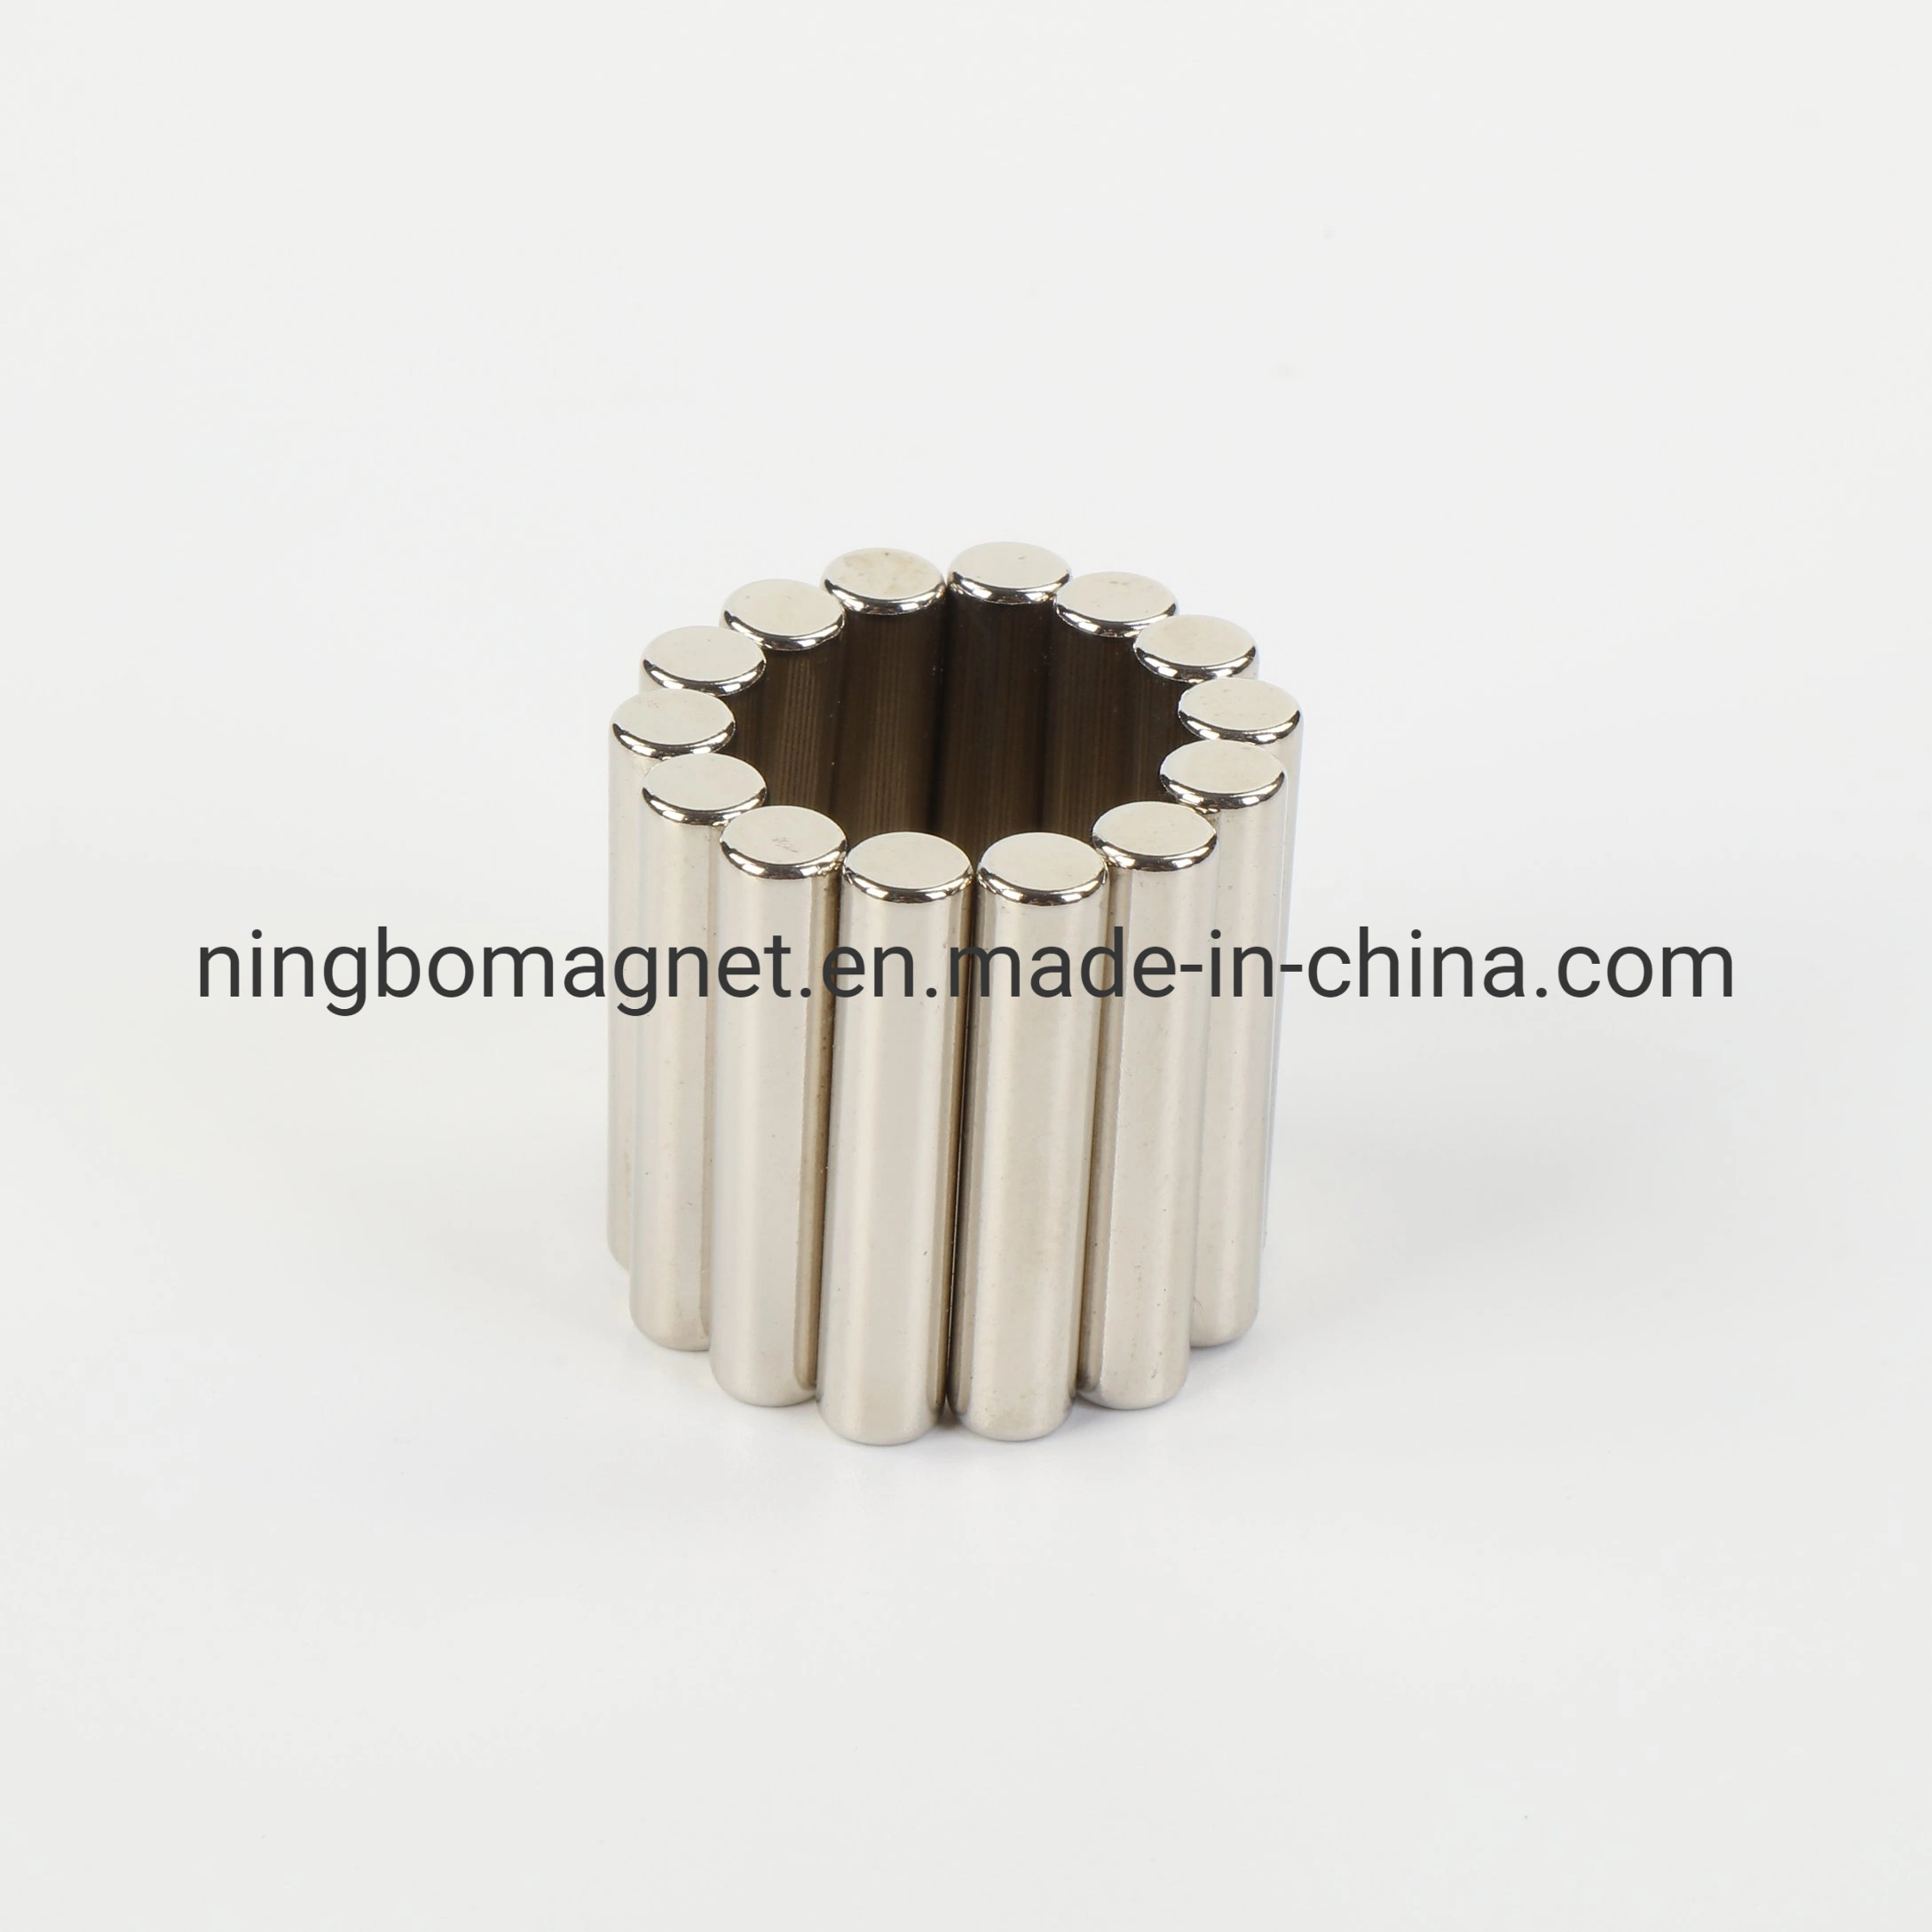 Hot Sale Strong NdFeB Permanent Neodymium Cylinder Magnet for Industrial